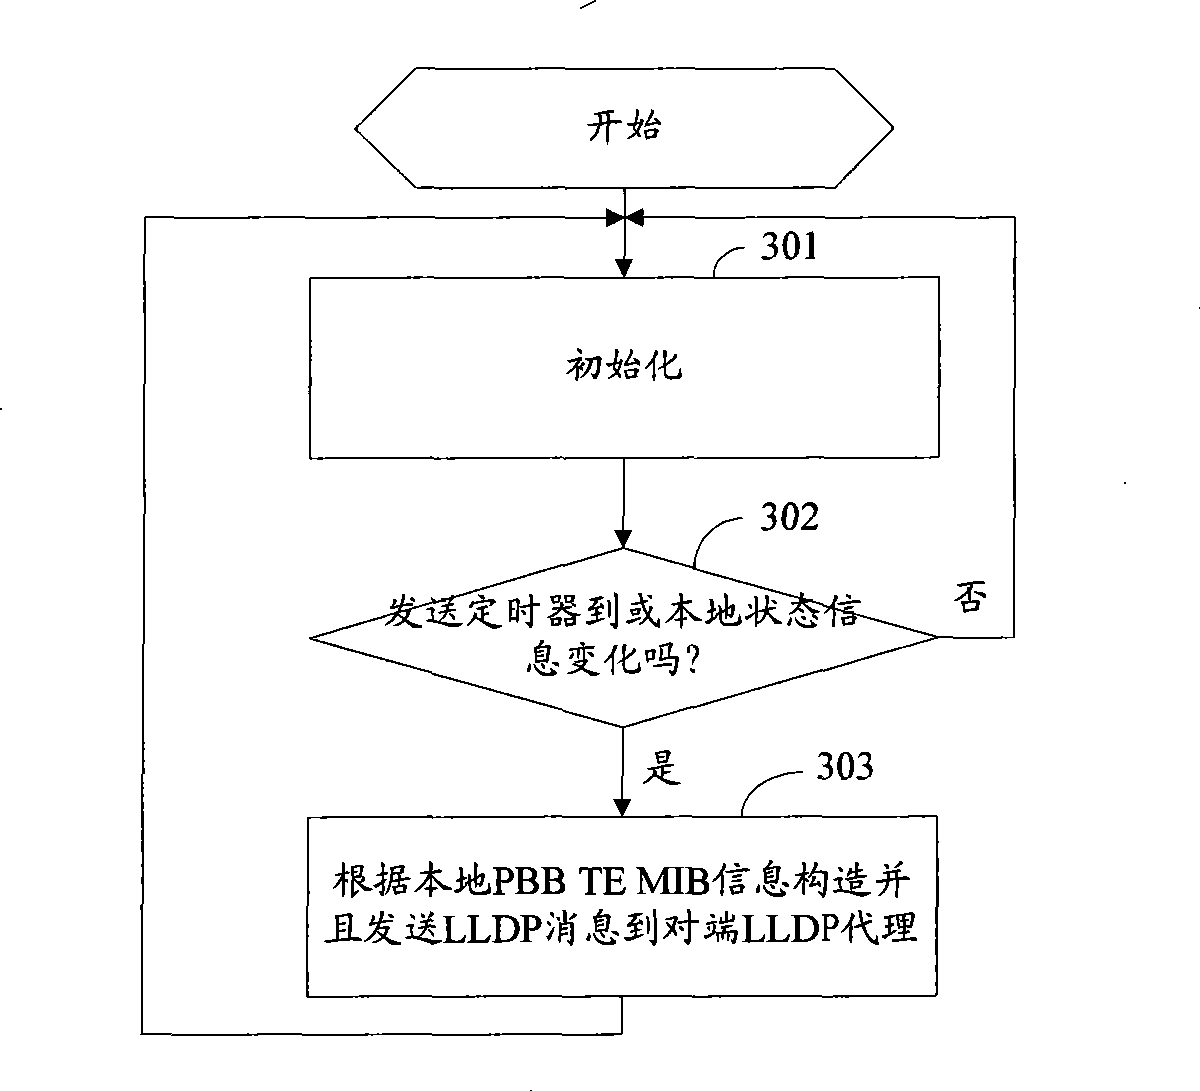 Method and apparatus for automatic topological discover and resource management in PBB TE network